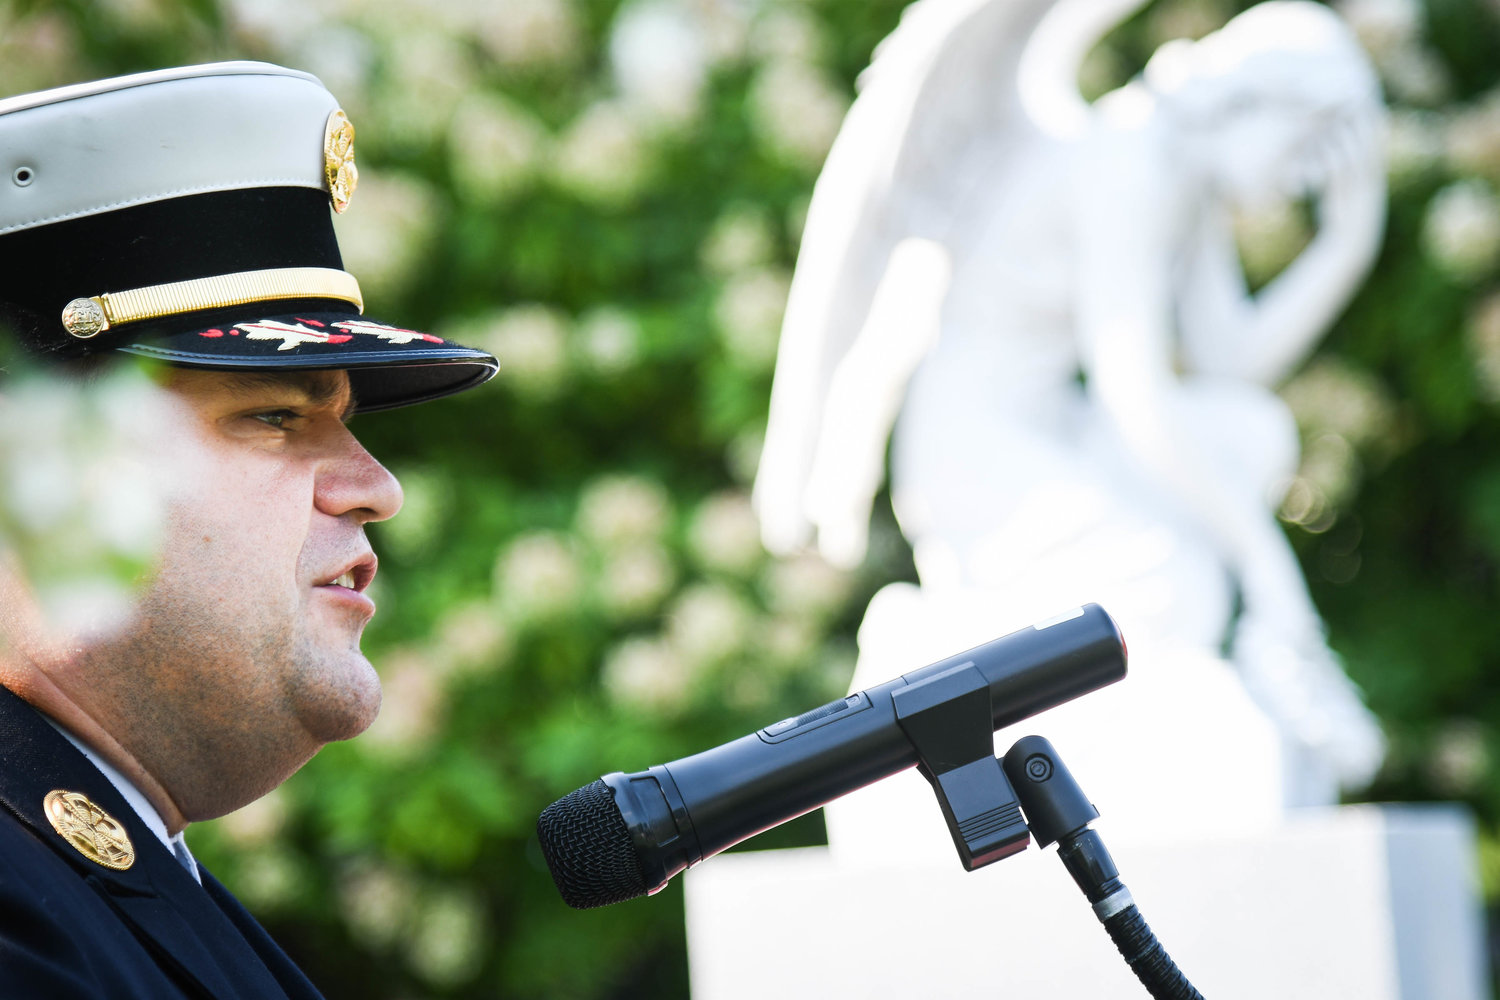 Utica Fire Chief Scott Ingersoll speaks during the annual 9/11 Remembrance Ceremony on Friday morning at the 9/11 Memorial in Utica.